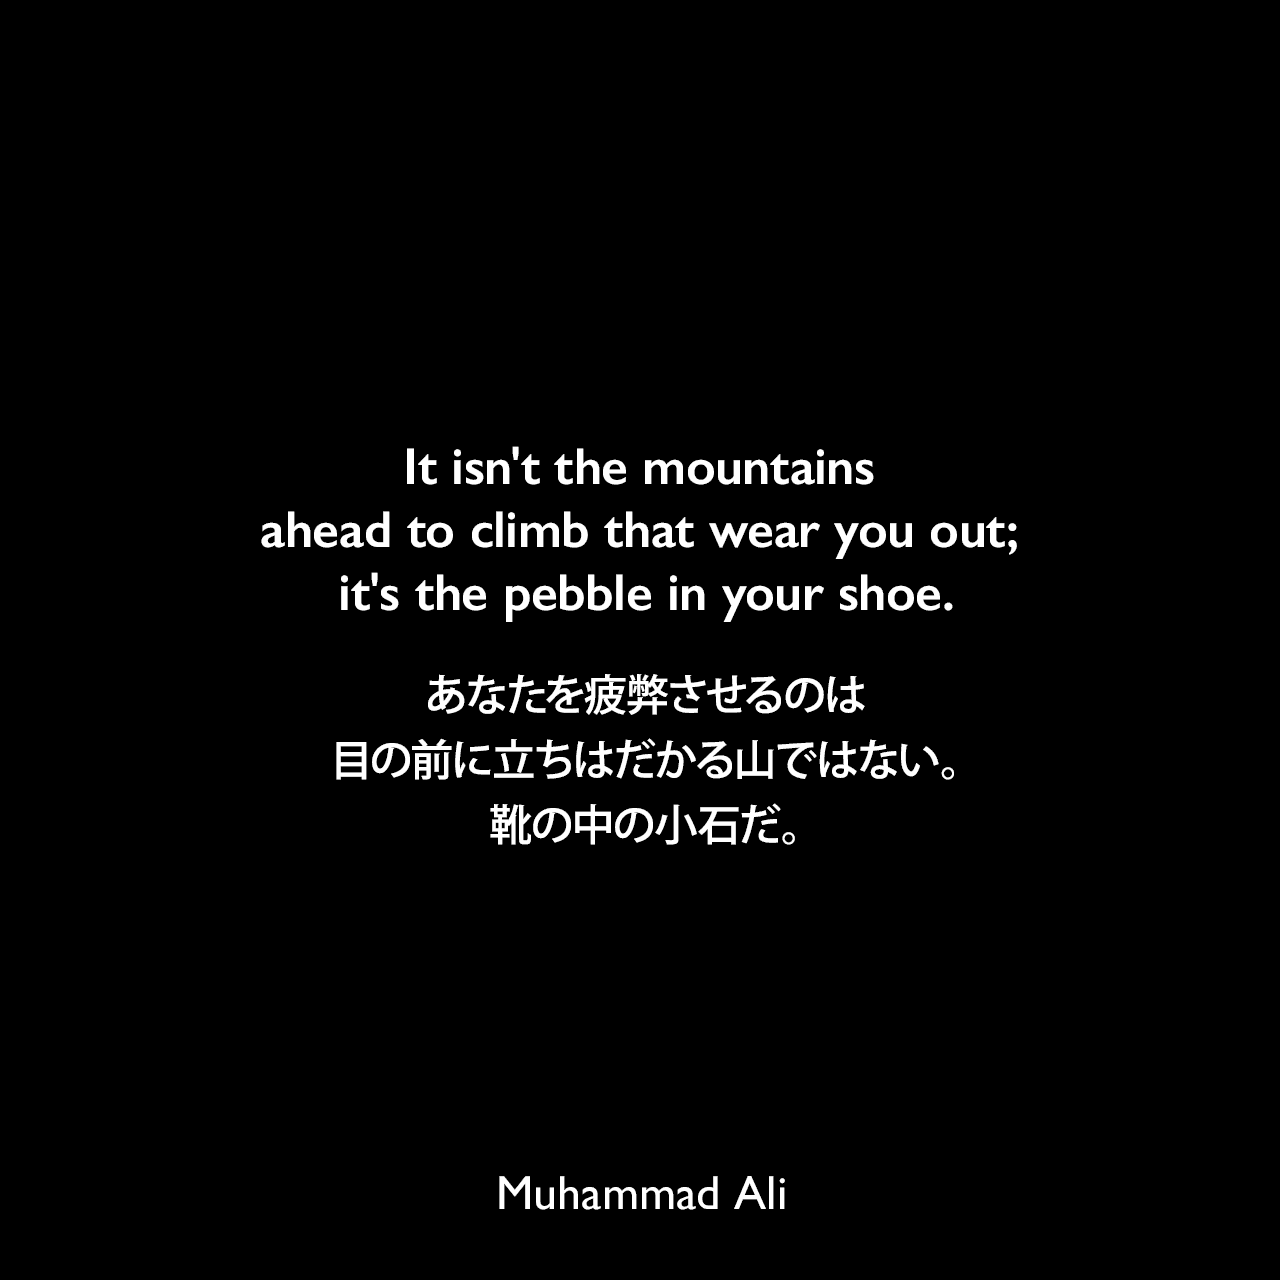 It isn't the mountains ahead to climb that wear you out; it's the pebble in your shoe.あなたを疲弊させるのは、目の前に立ちはだかる山ではない。靴の中の小石だ。Muhammad Ali